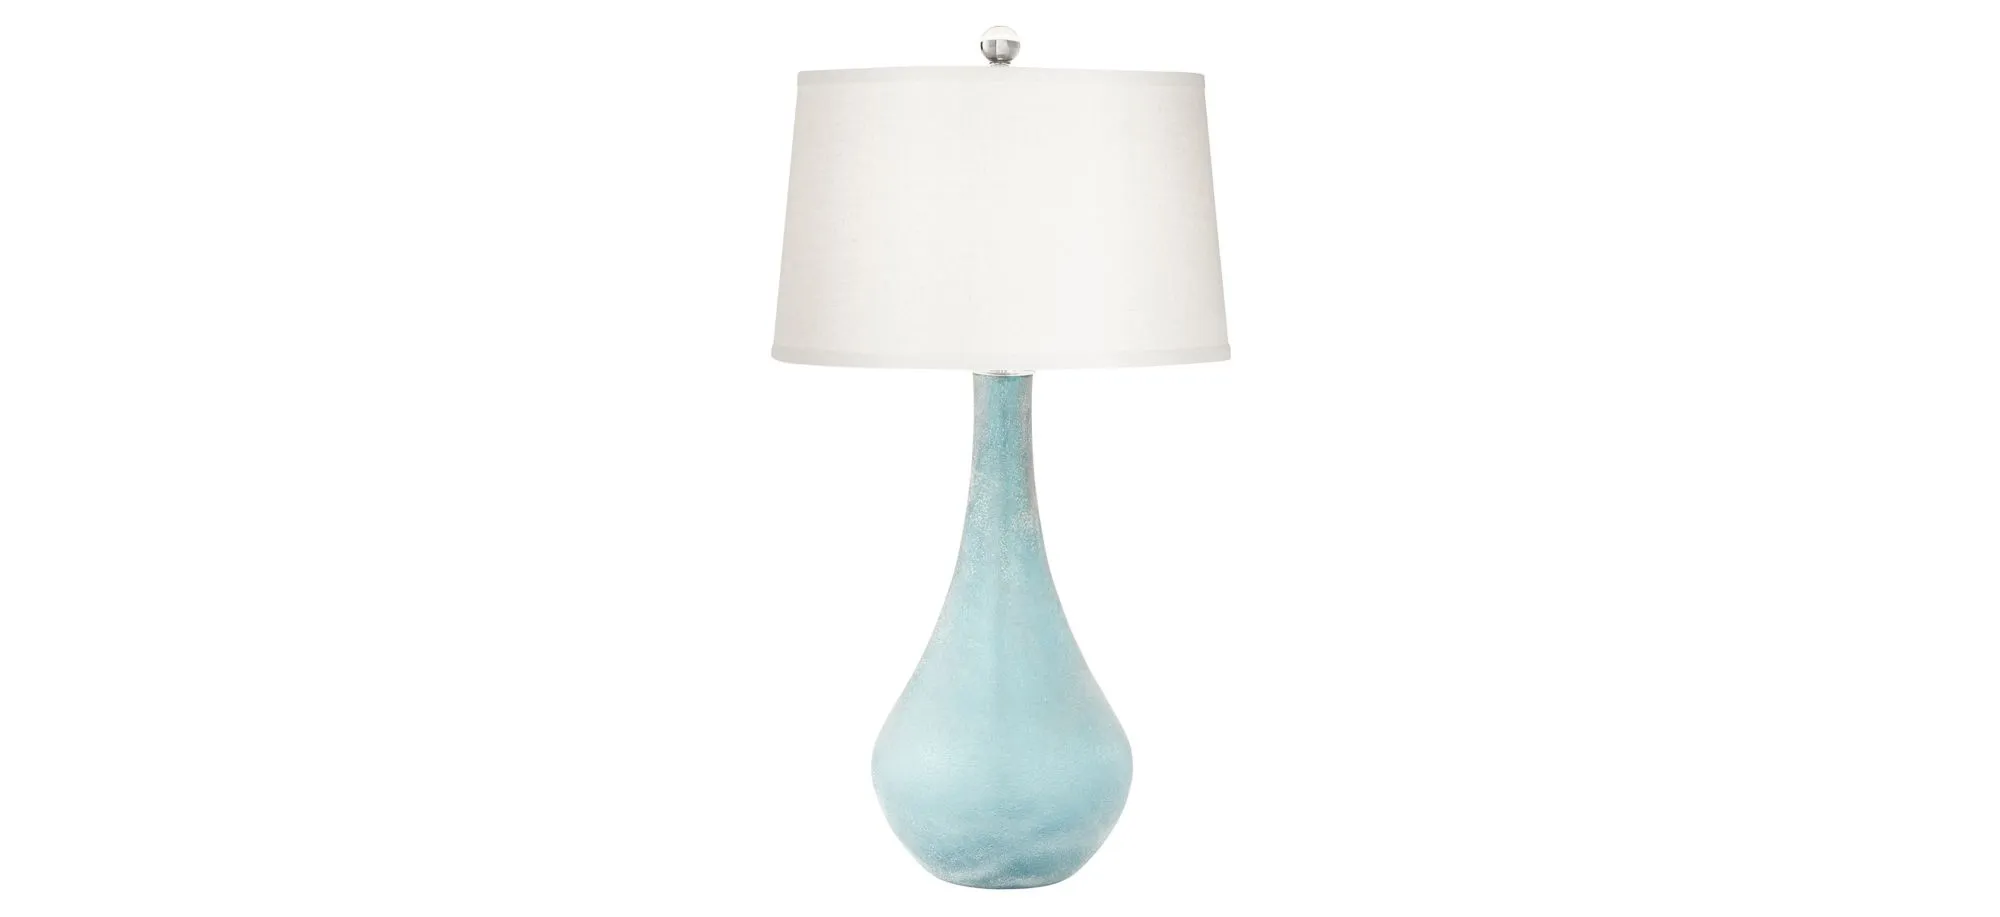 City Shadow Table Lamp in Teal Blue by Pacific Coast